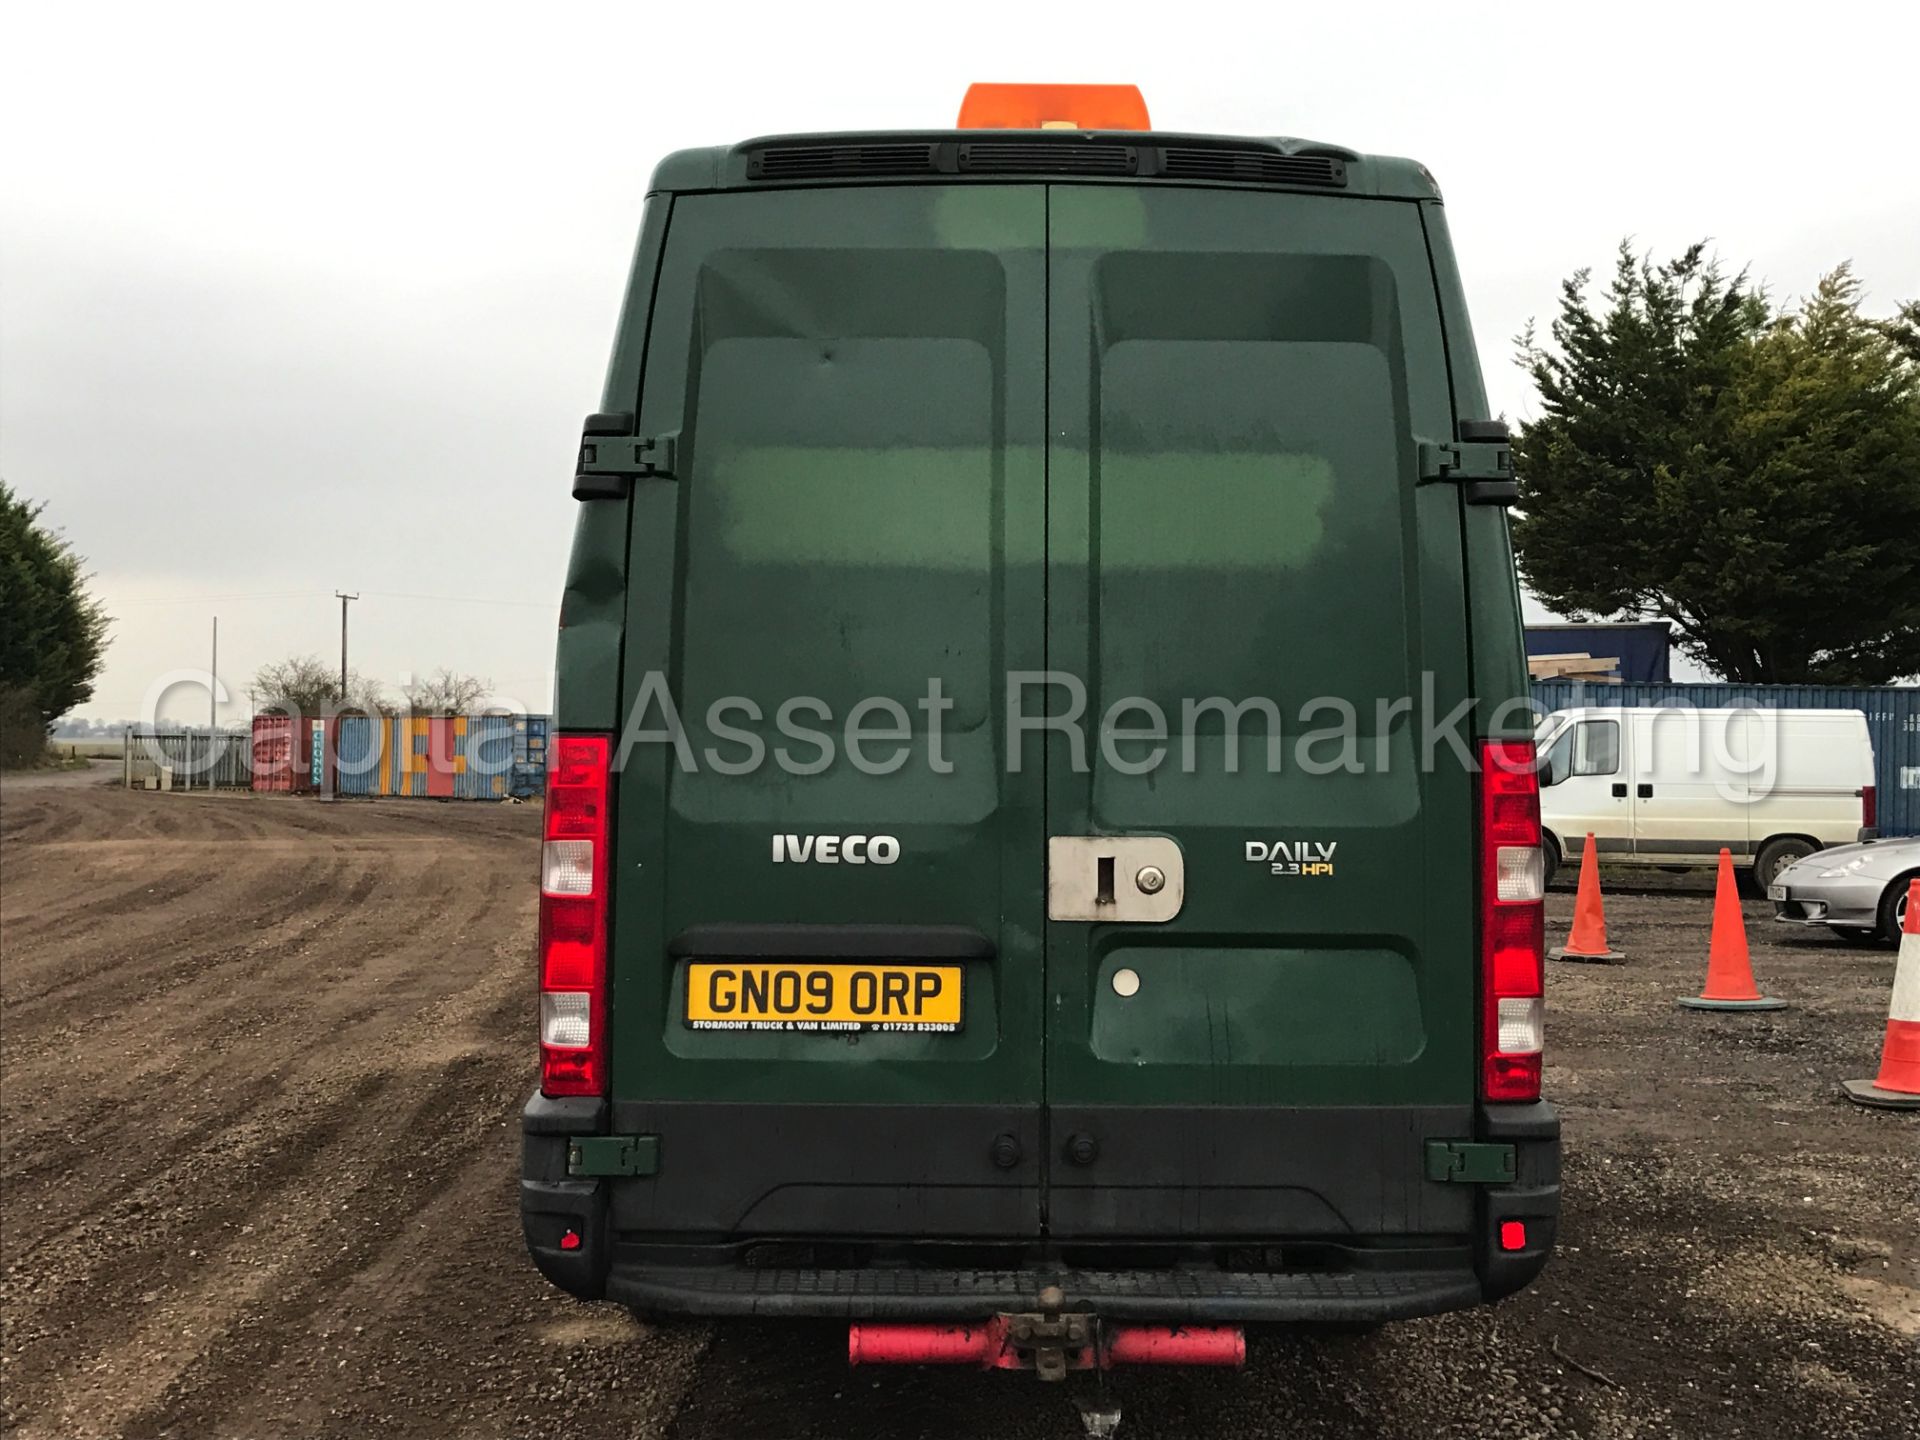 IVECO DAILY 35S12 'MWB HI-ROOF' (2009) '2.3 DIESEL - 120 BHP - 5 SPEED' (1 COMPANY OWNER) - Image 7 of 15